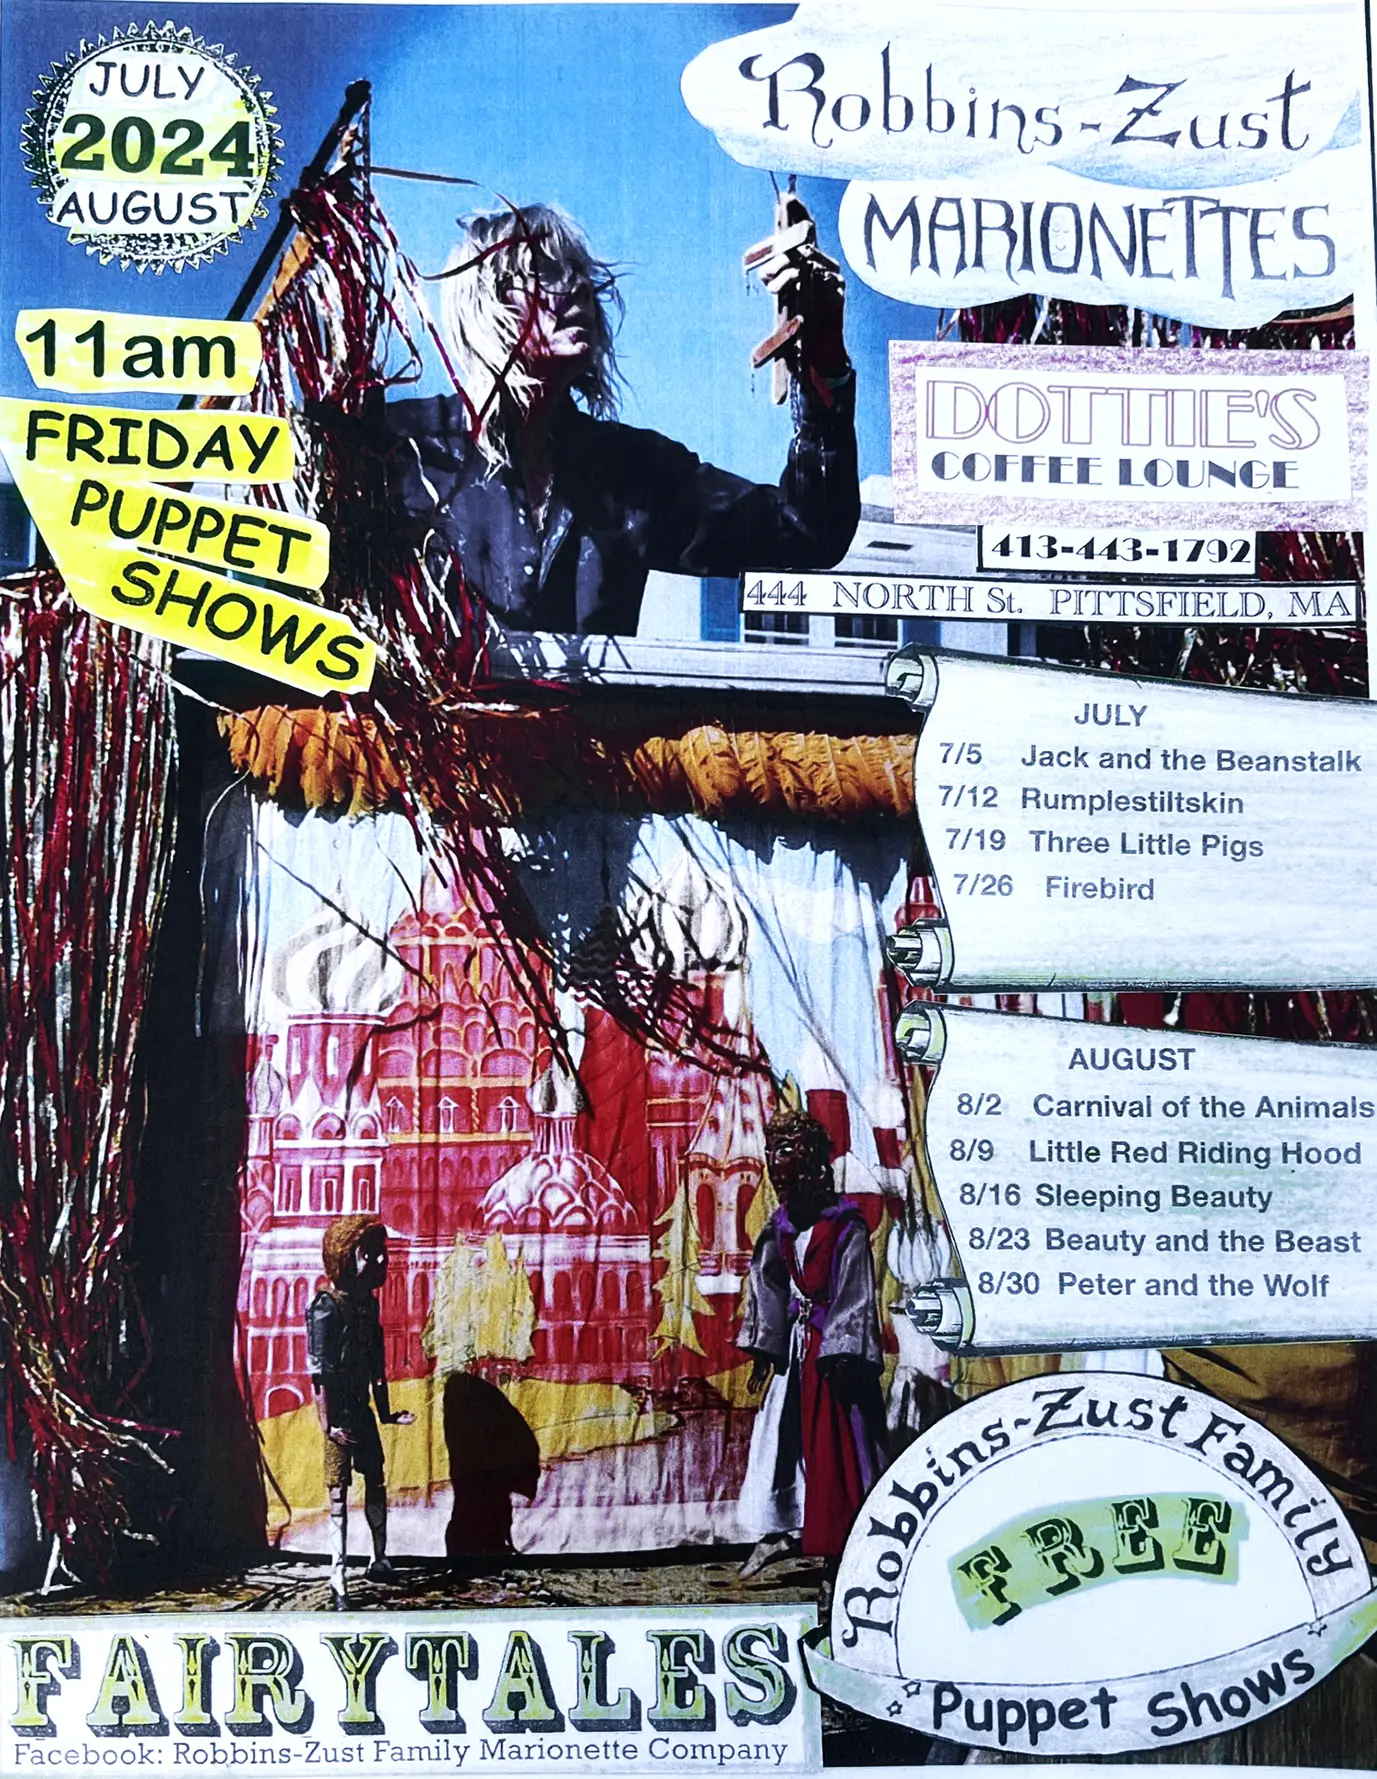 Poster for Robbins-Zust Marionettes' Free Friday Puppet Shows at Dottie's Coffee Lounge, featuring a marionette performance scene. Shows are every Friday at 11 AM in July and August 2024, located at 444 North Street, Pittsfield, MA. The poster lists the schedule of performances and includes contact information for Dottie's Coffee Lounge.